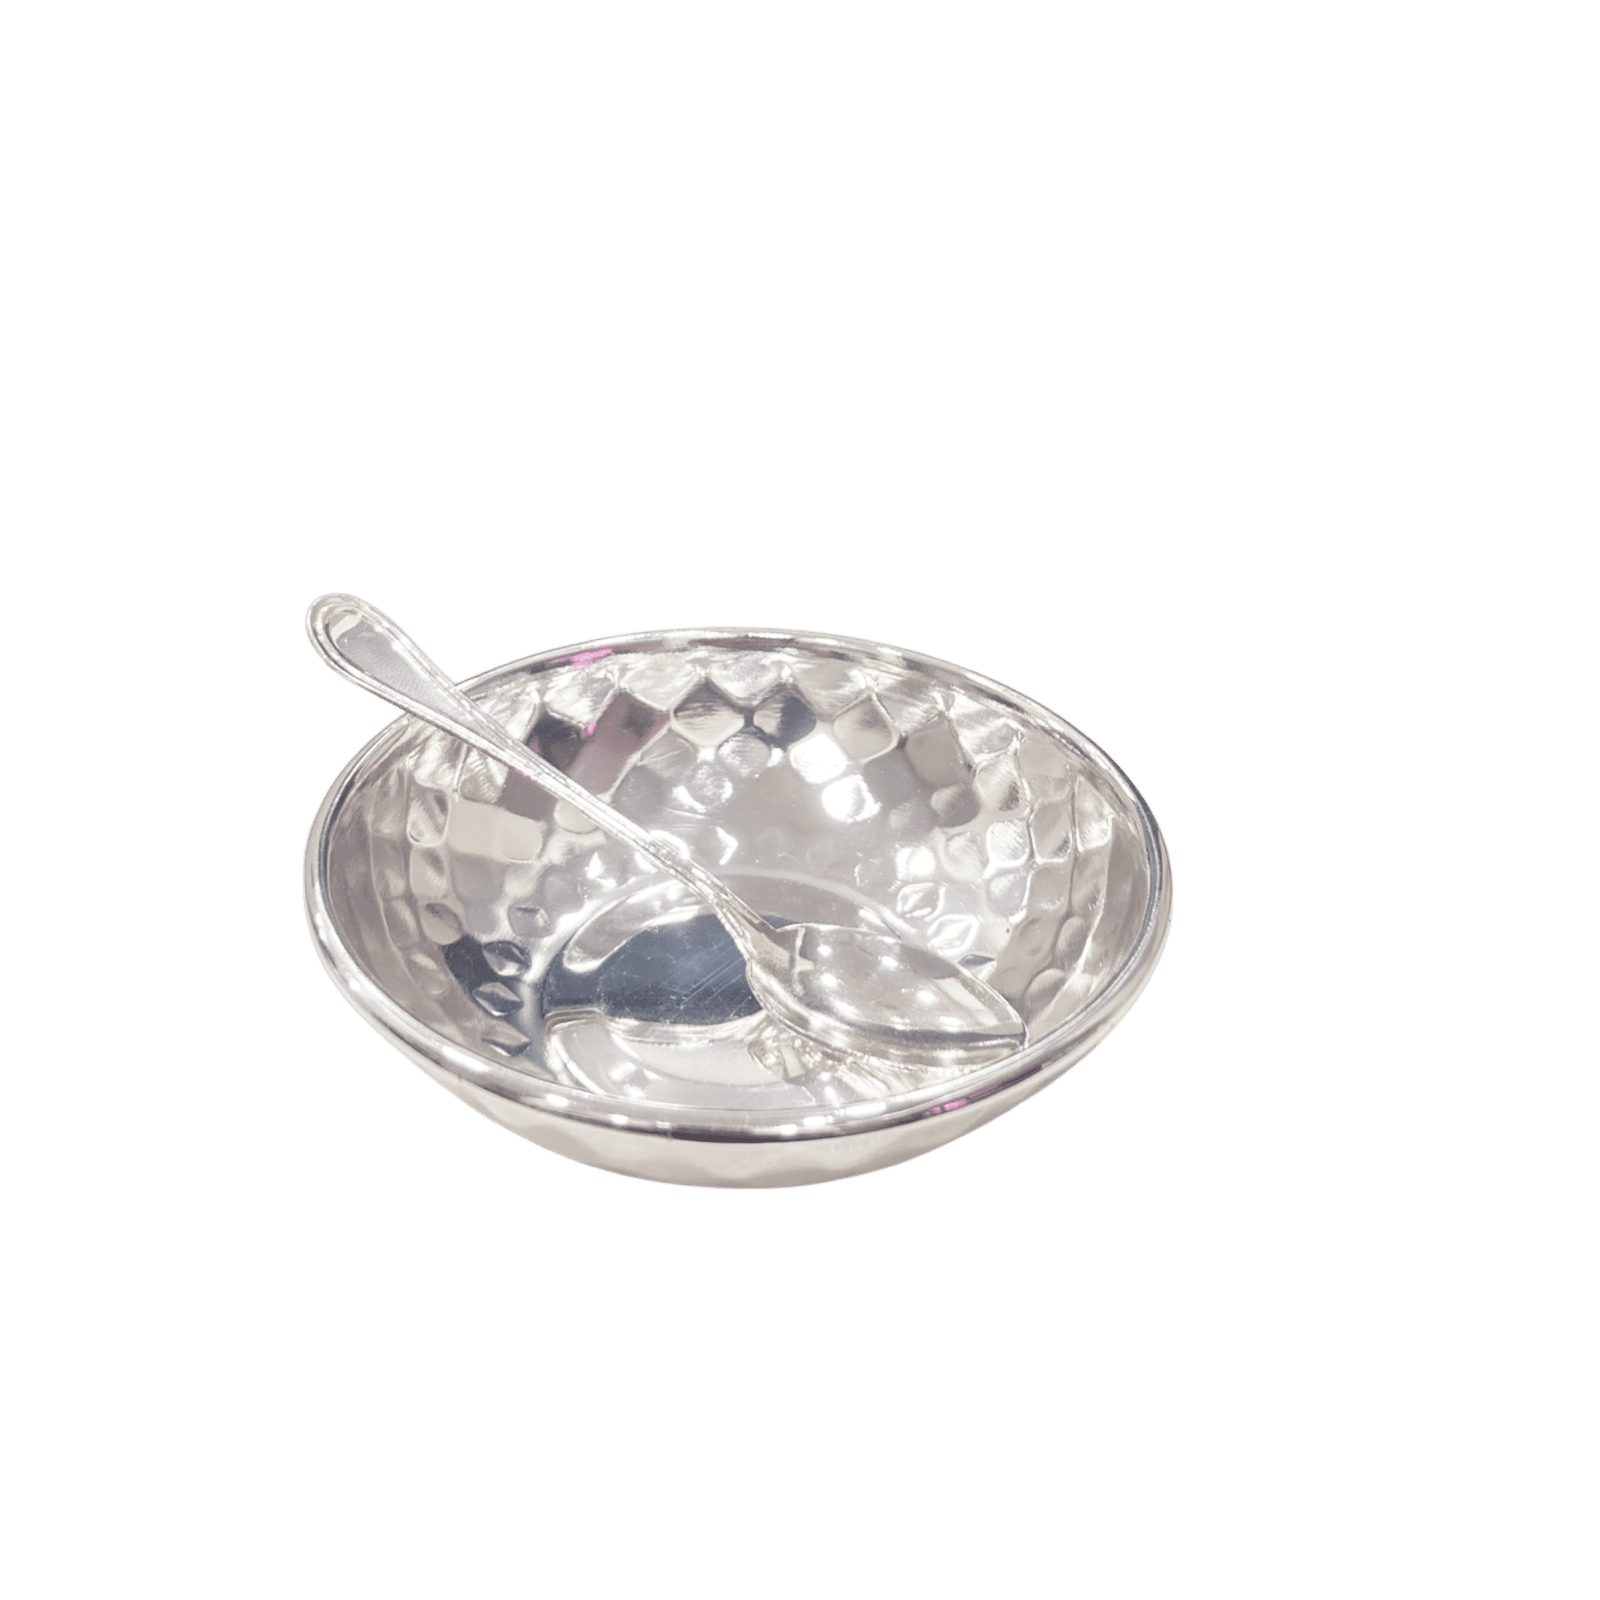 A Distinctive Silver Plated Bowl With Hammered Design & Spoon